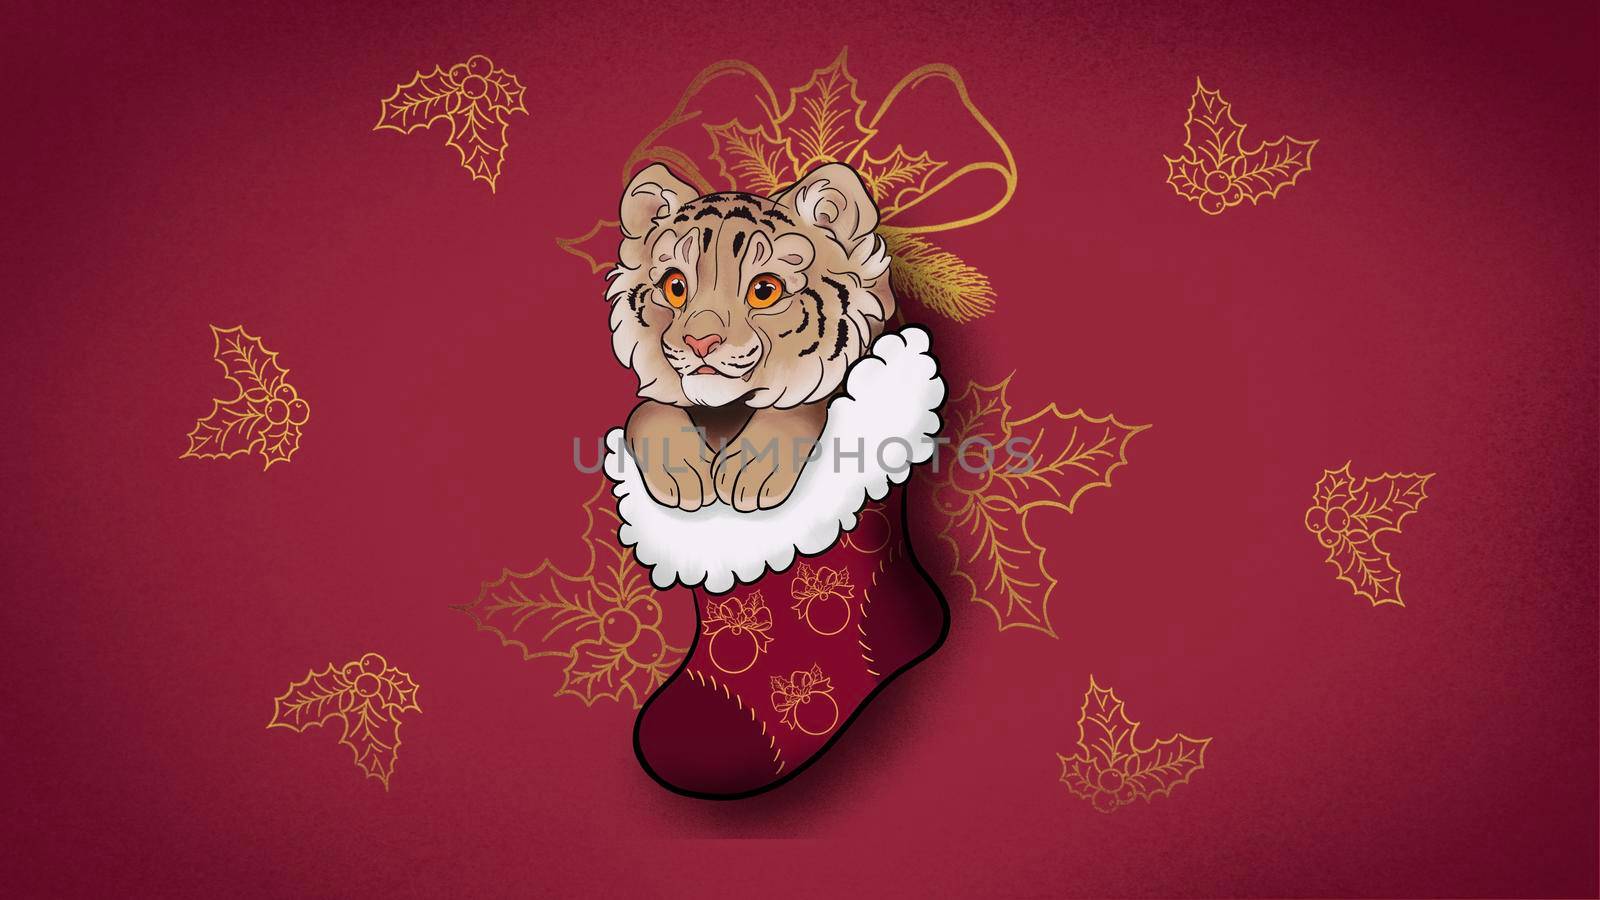 new year wallpaper with red background with golden tiger elements art